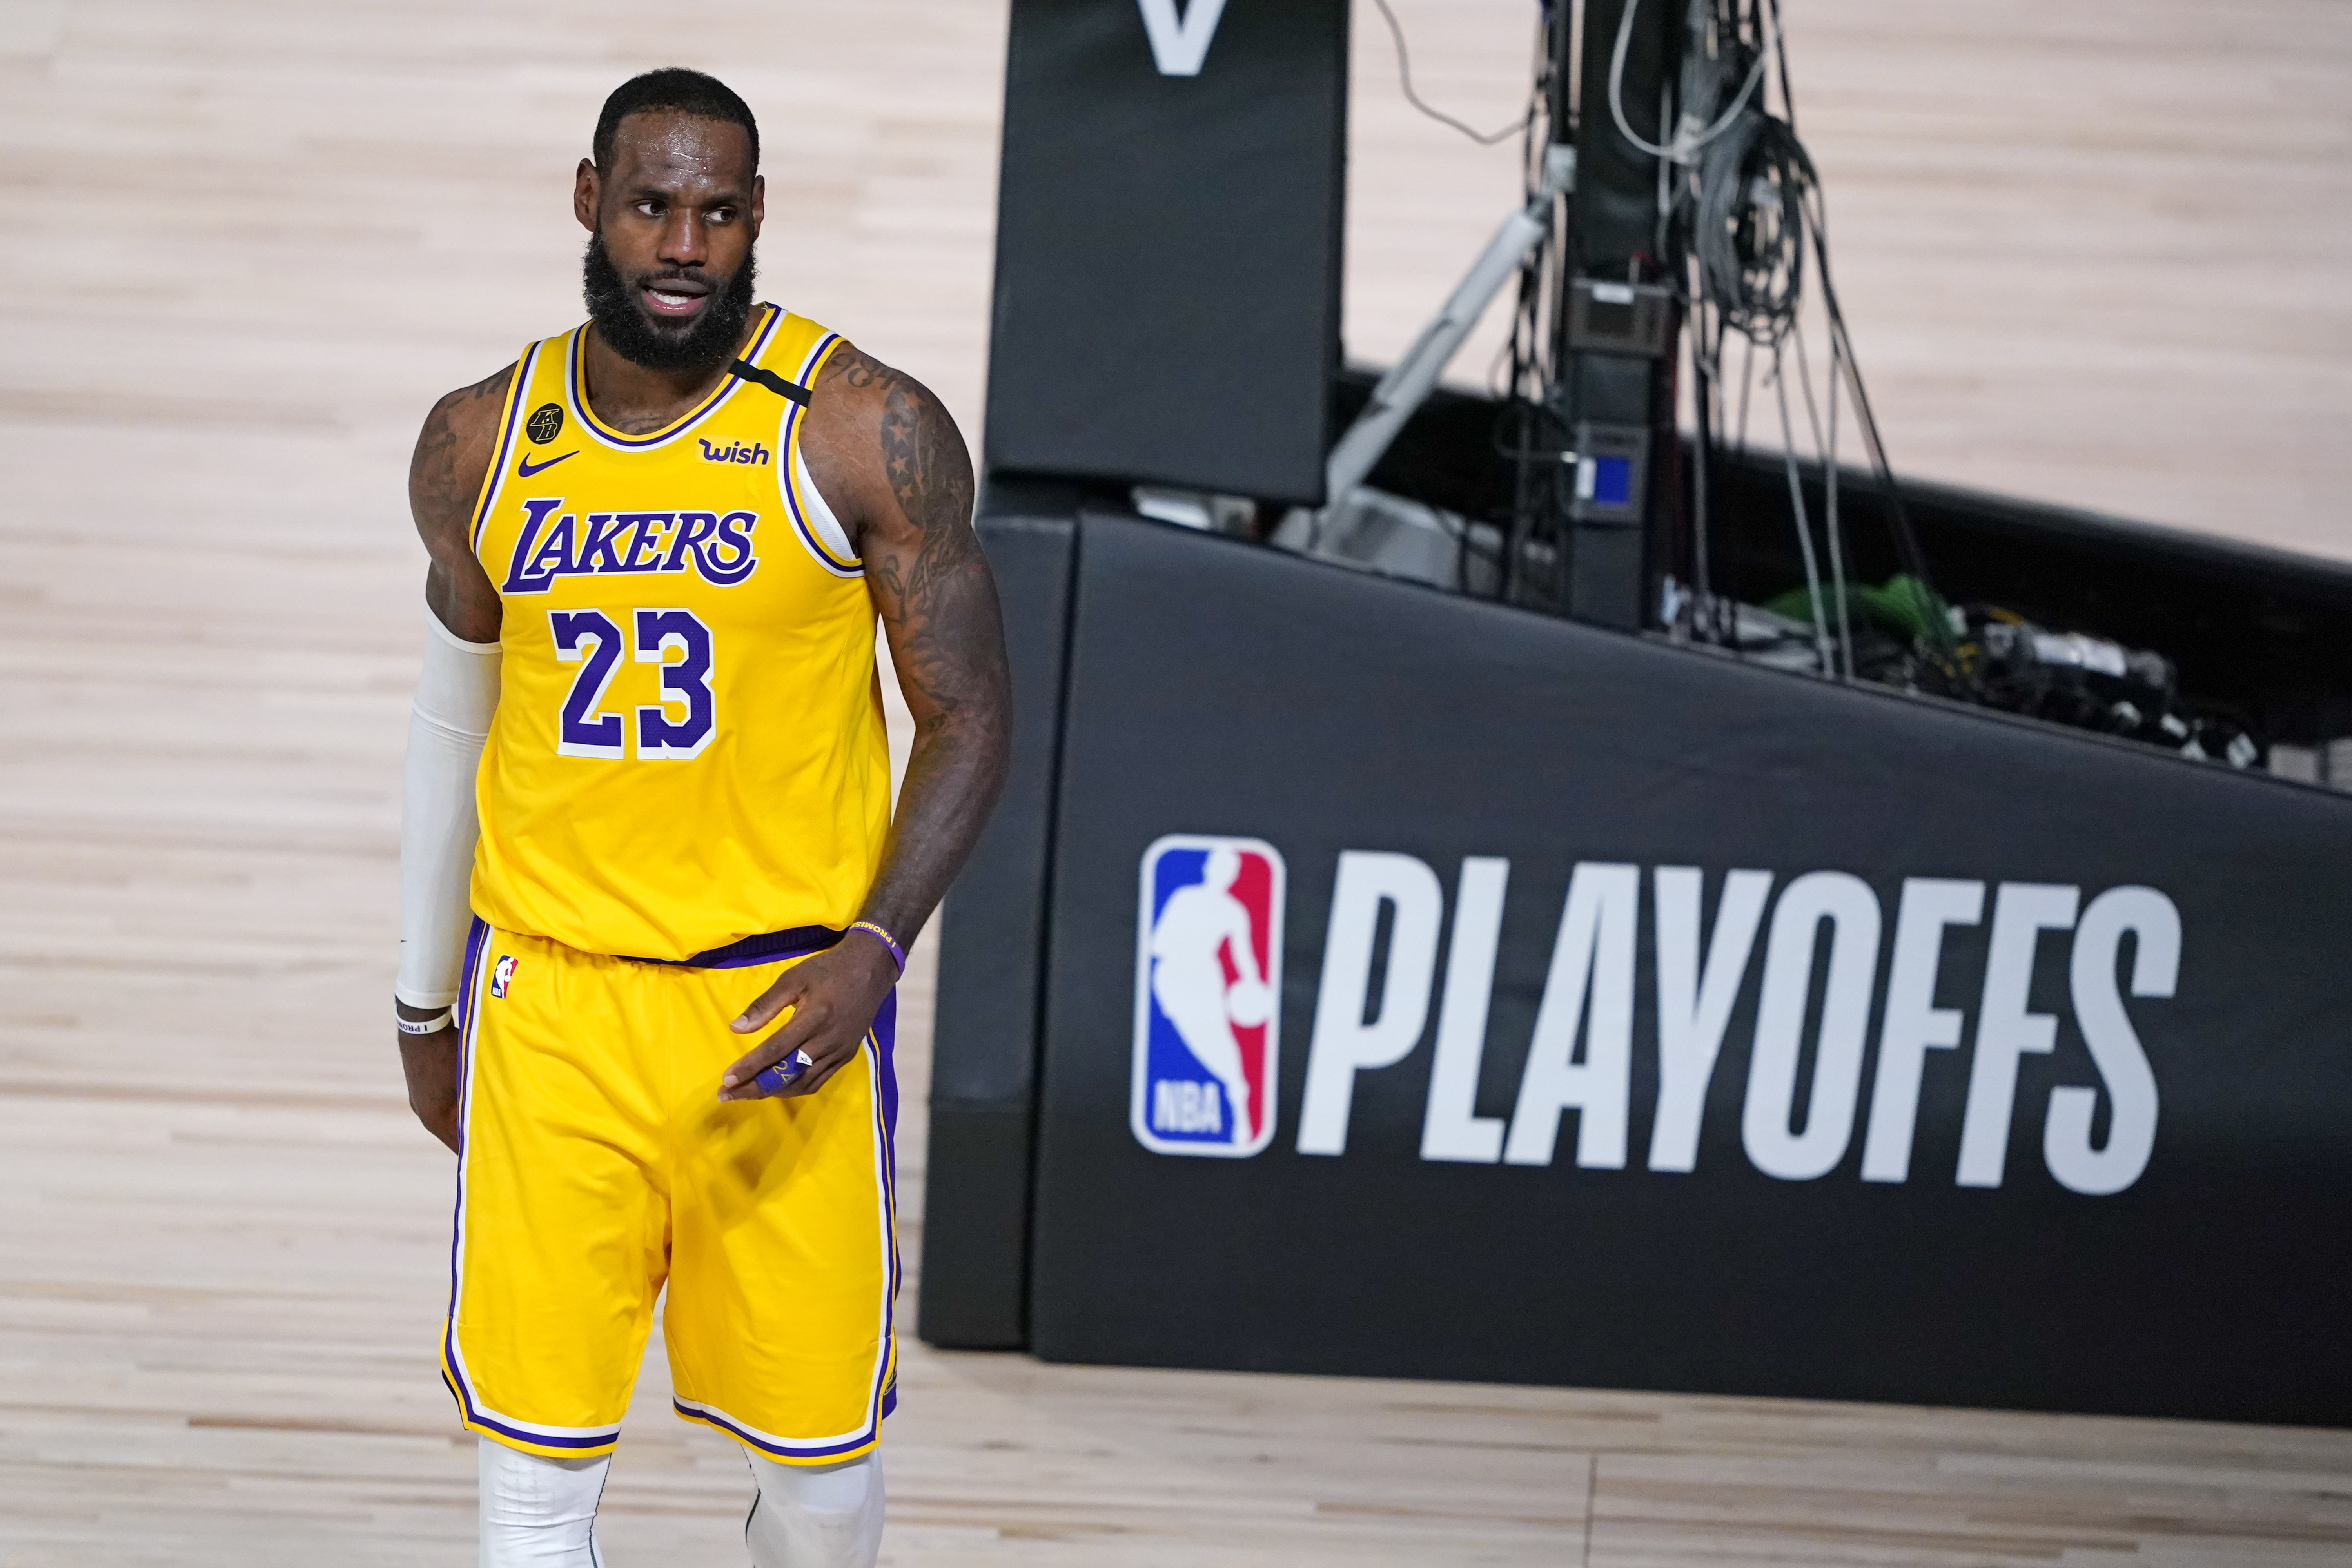 LA Lakers vs Houston Rockets in NBA playoffs Game 1 Score, time, TV channel, odds, how to watch free live stream online